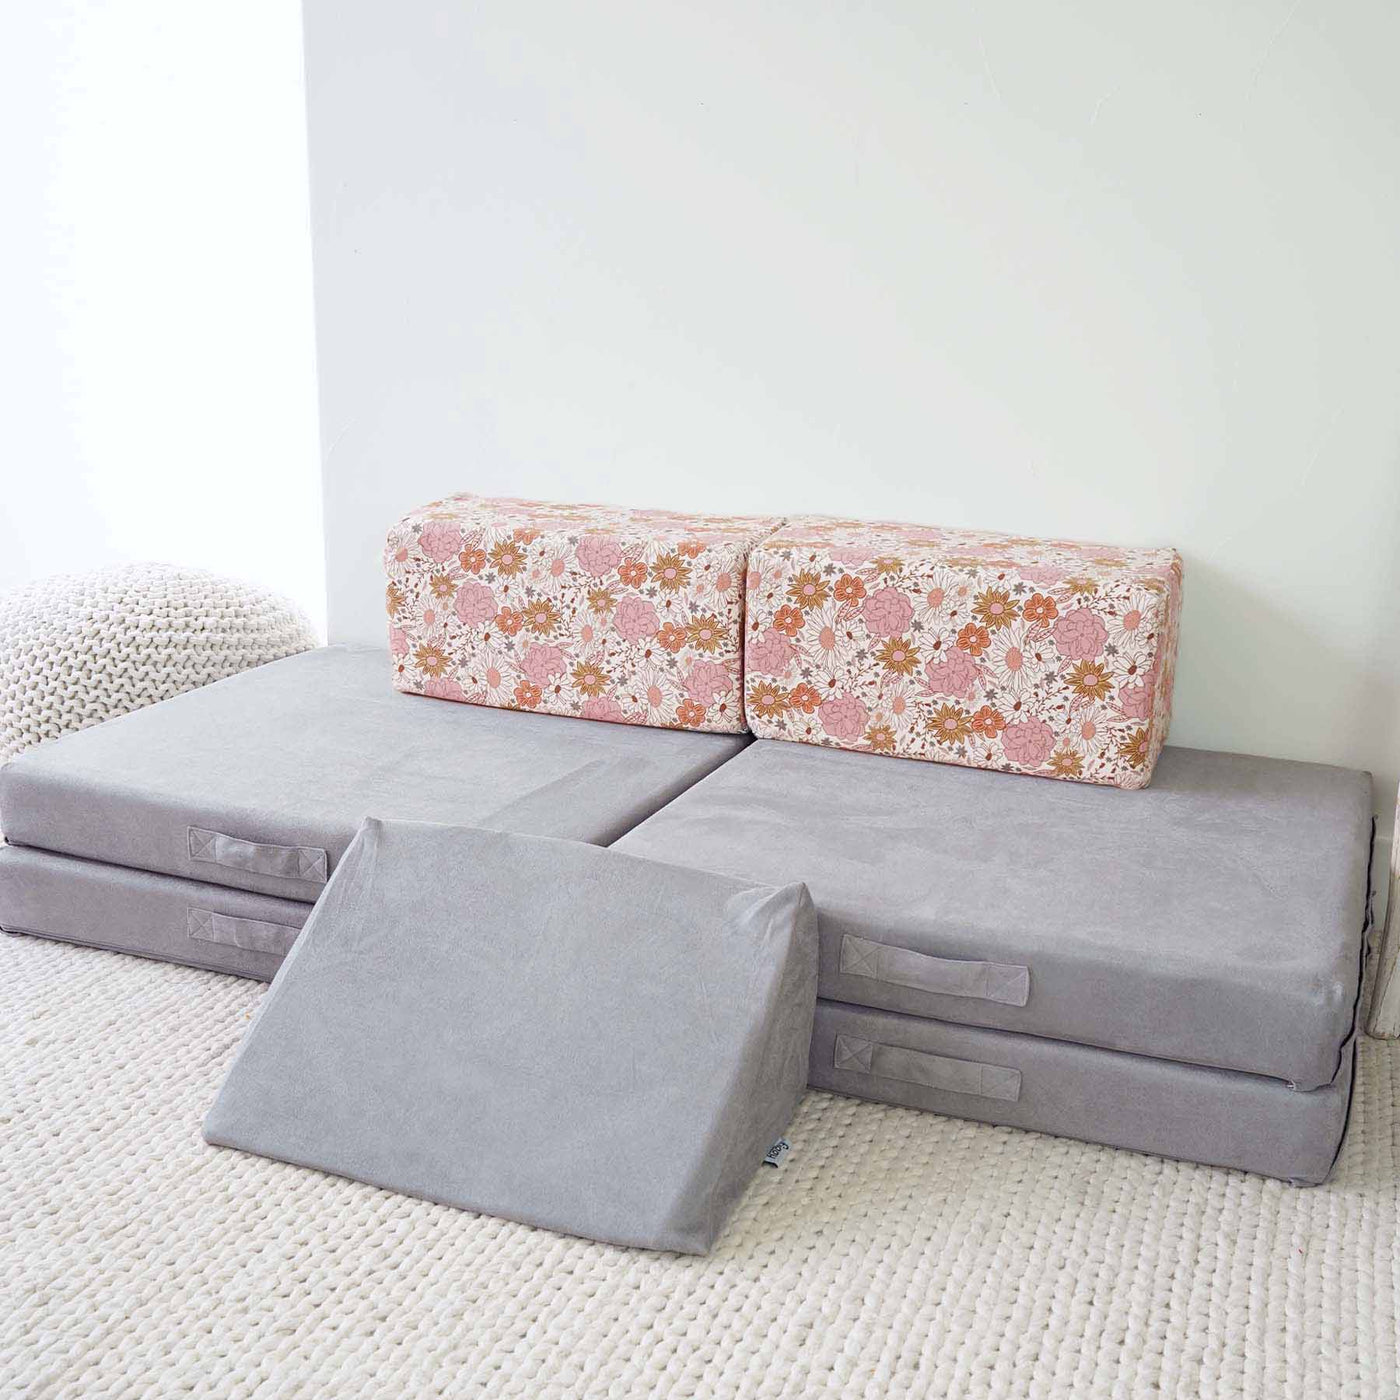 The Figgy Play Couch (7 pc) with Wedge X Caden Lane